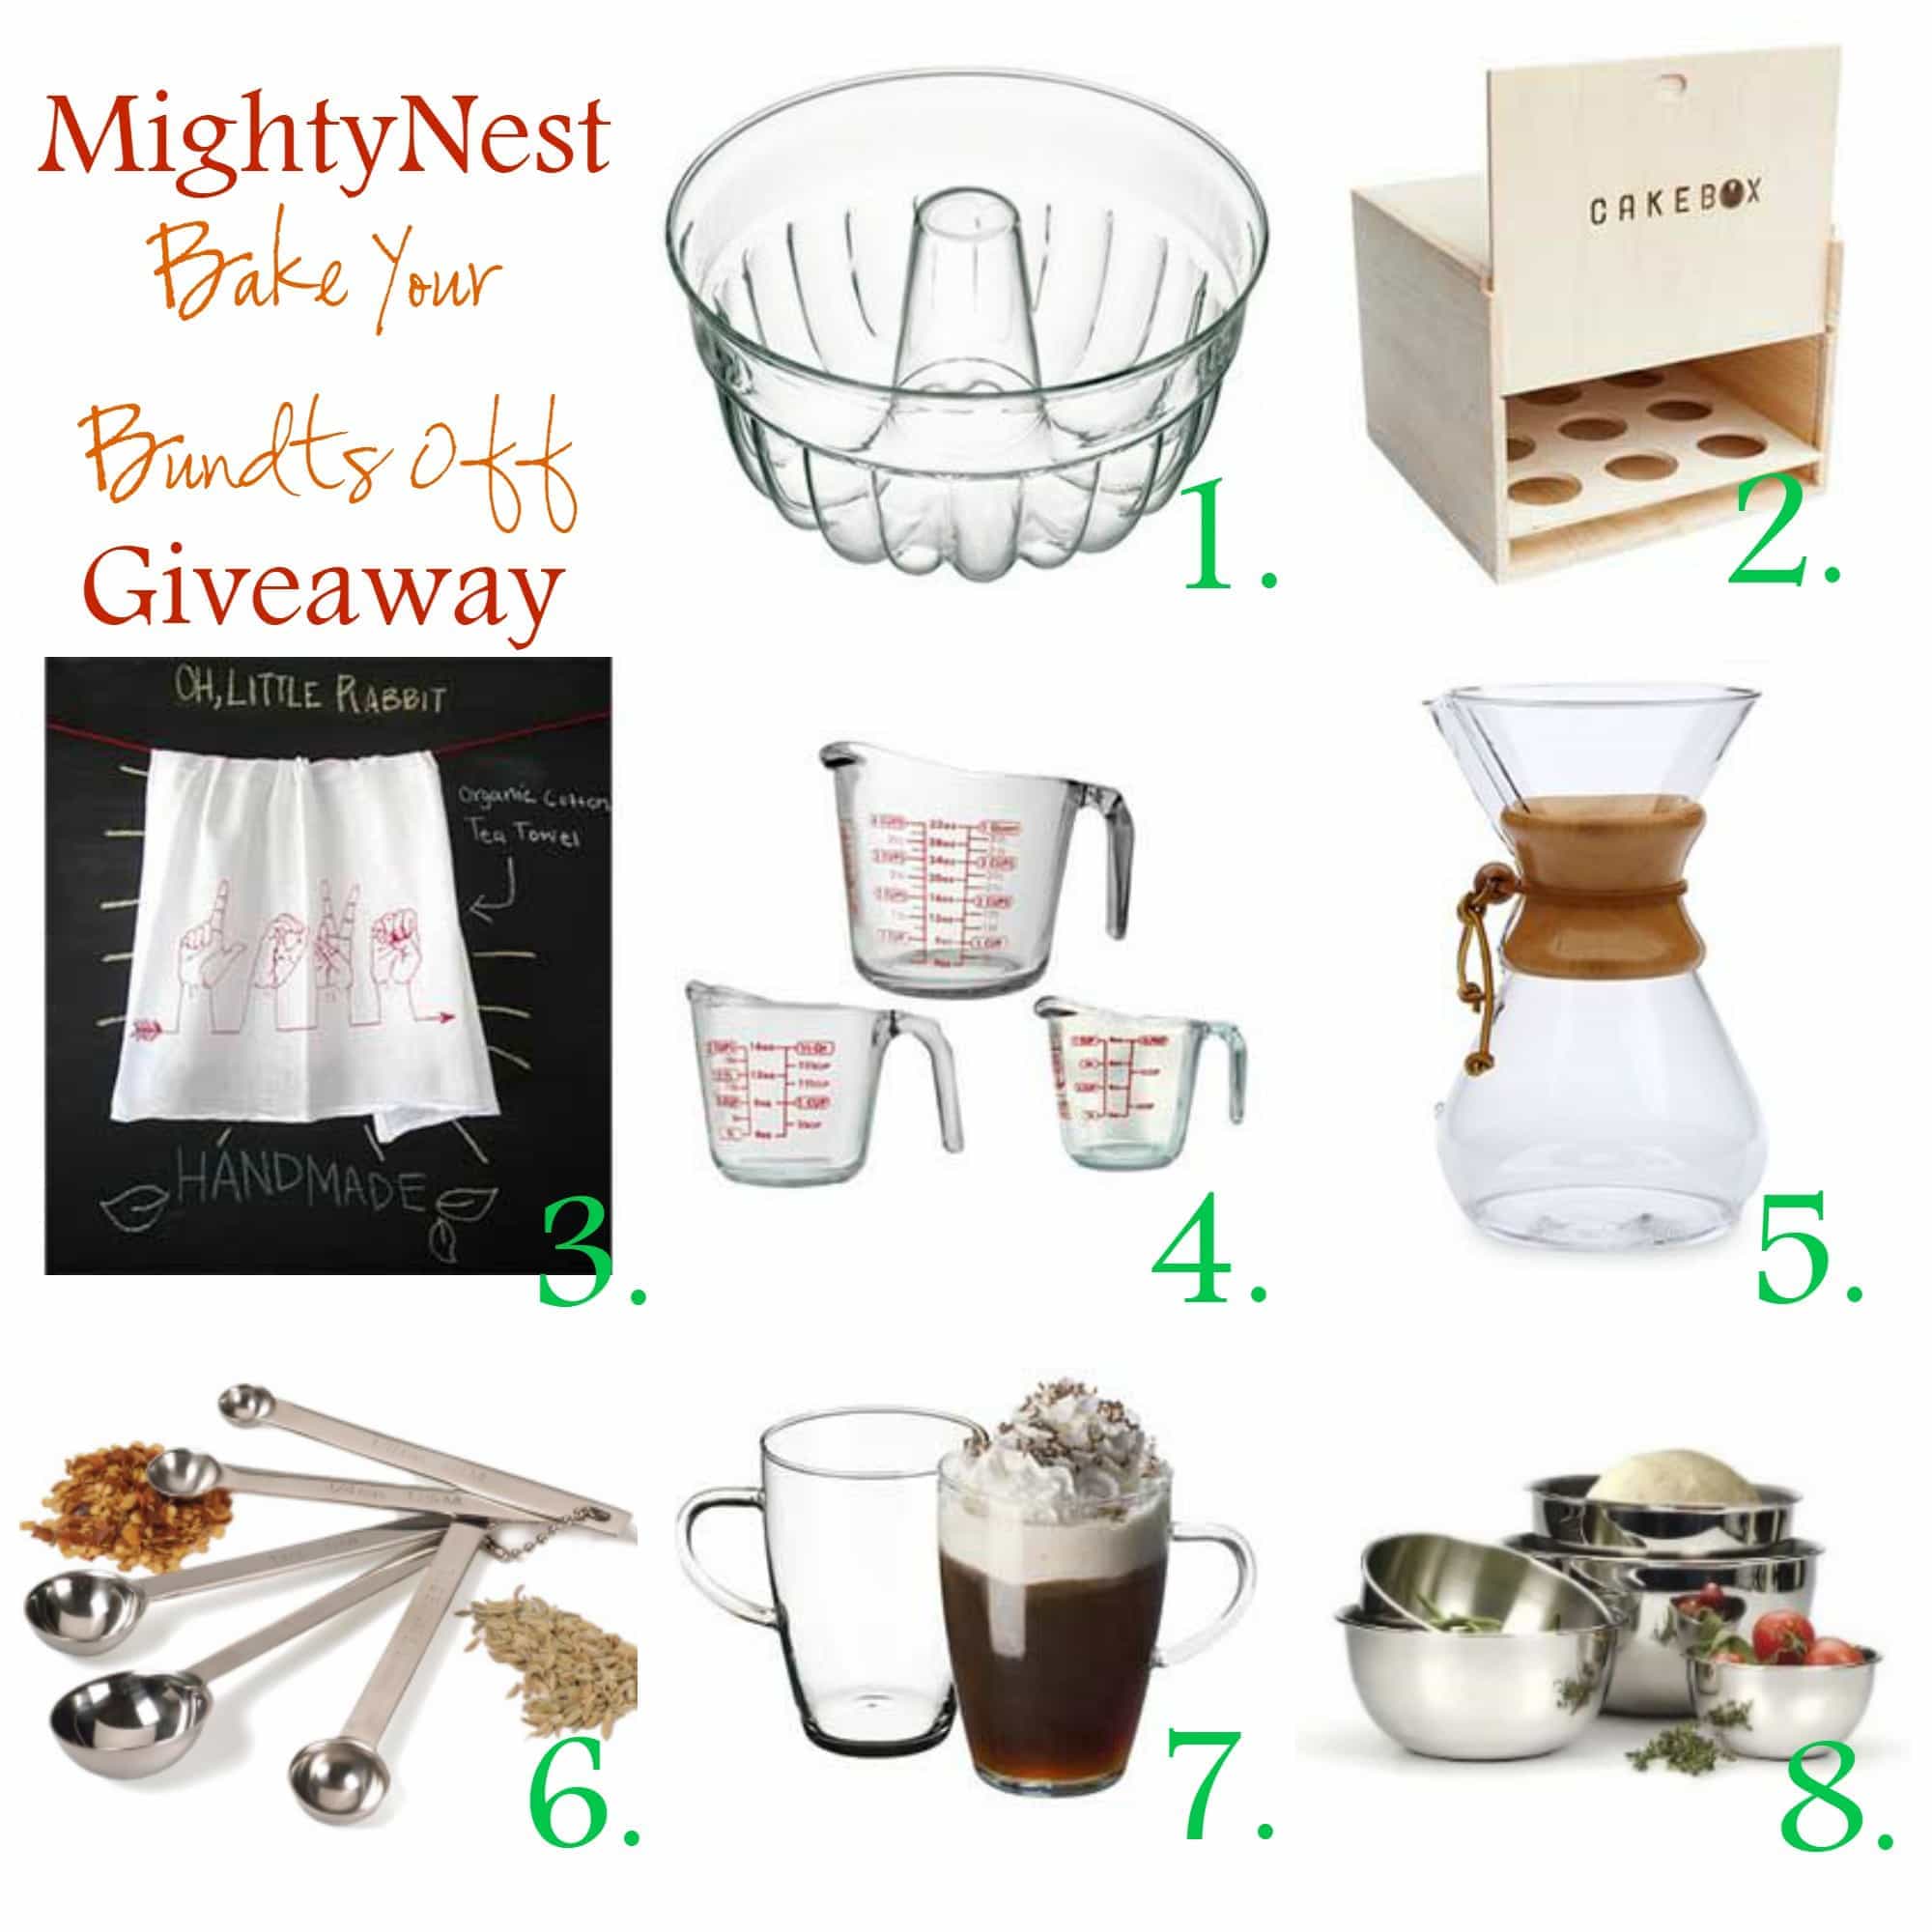 MightyNest Giveaway